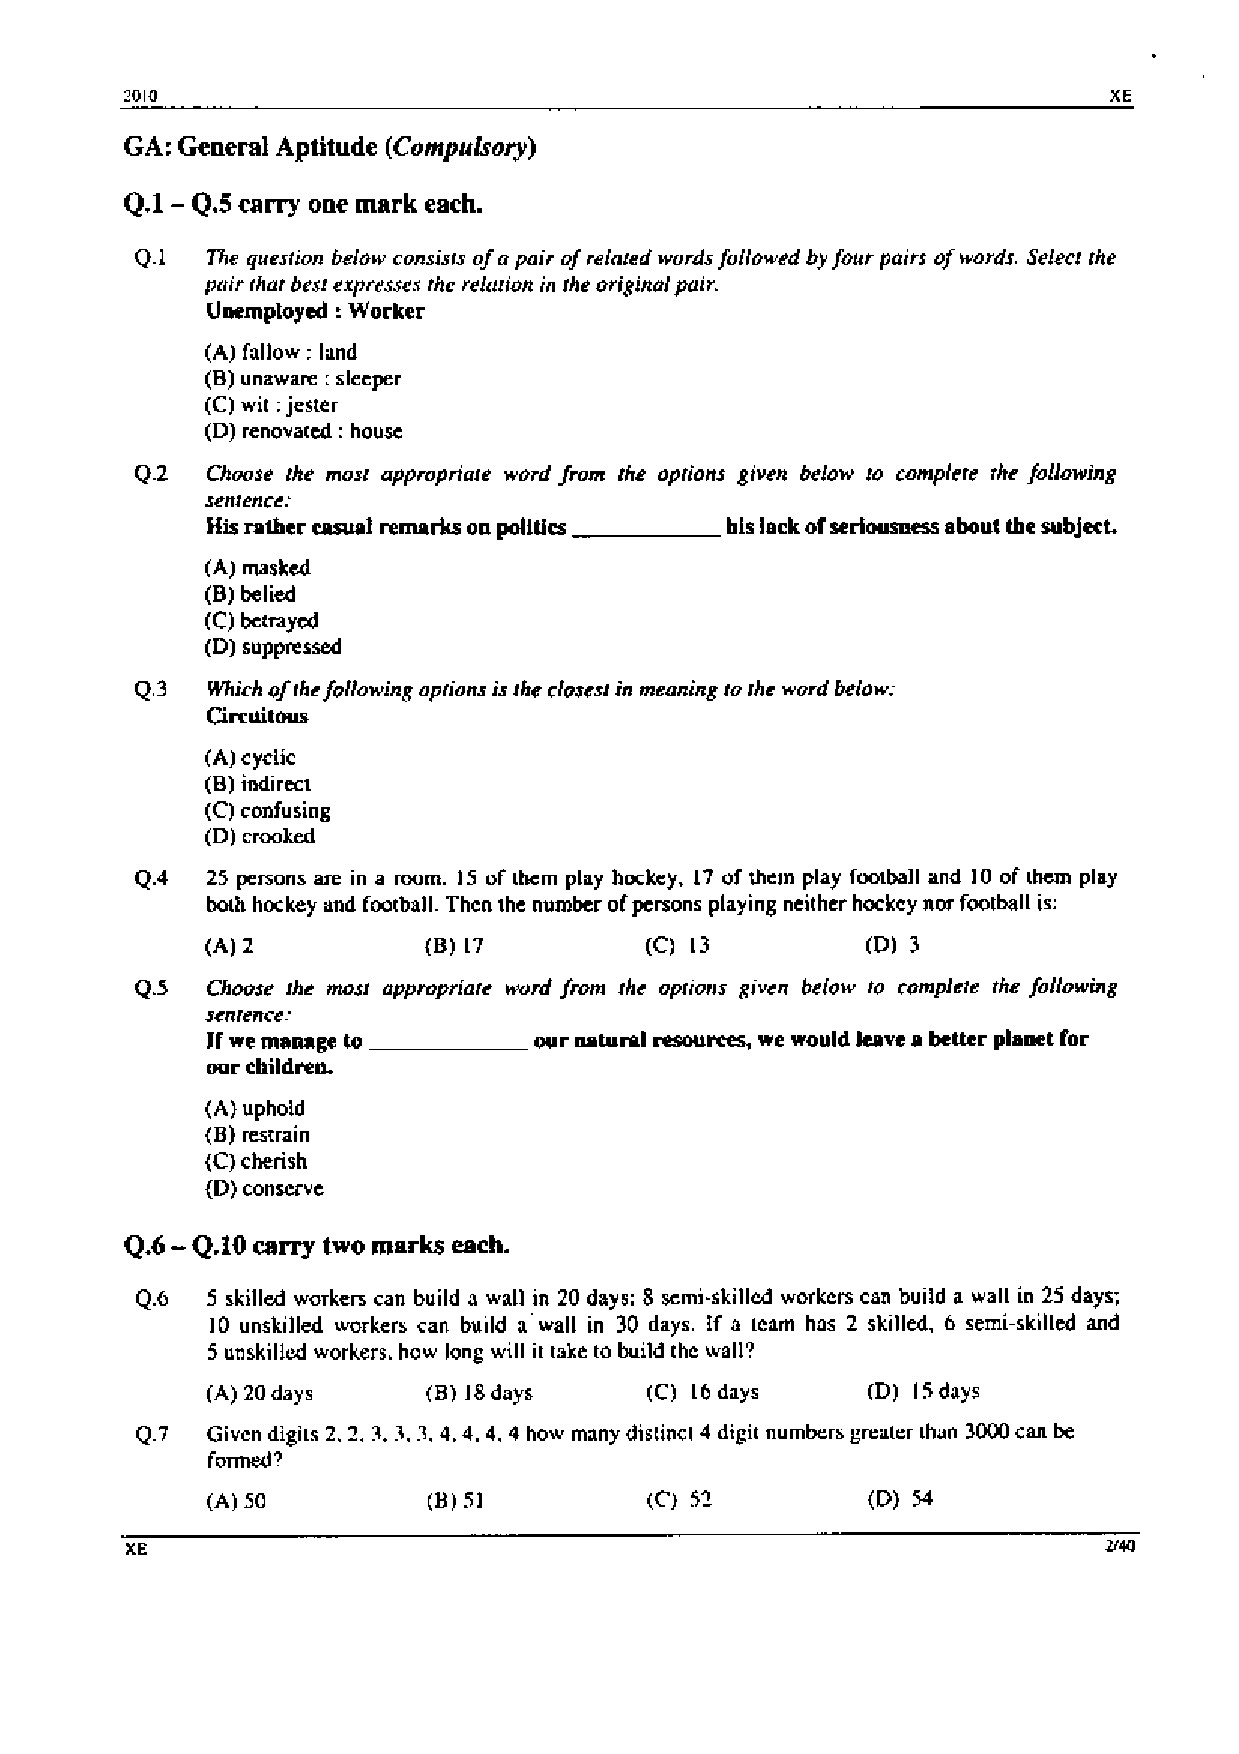 GATE Exam Question Paper 2010 Engineering Sciences 2